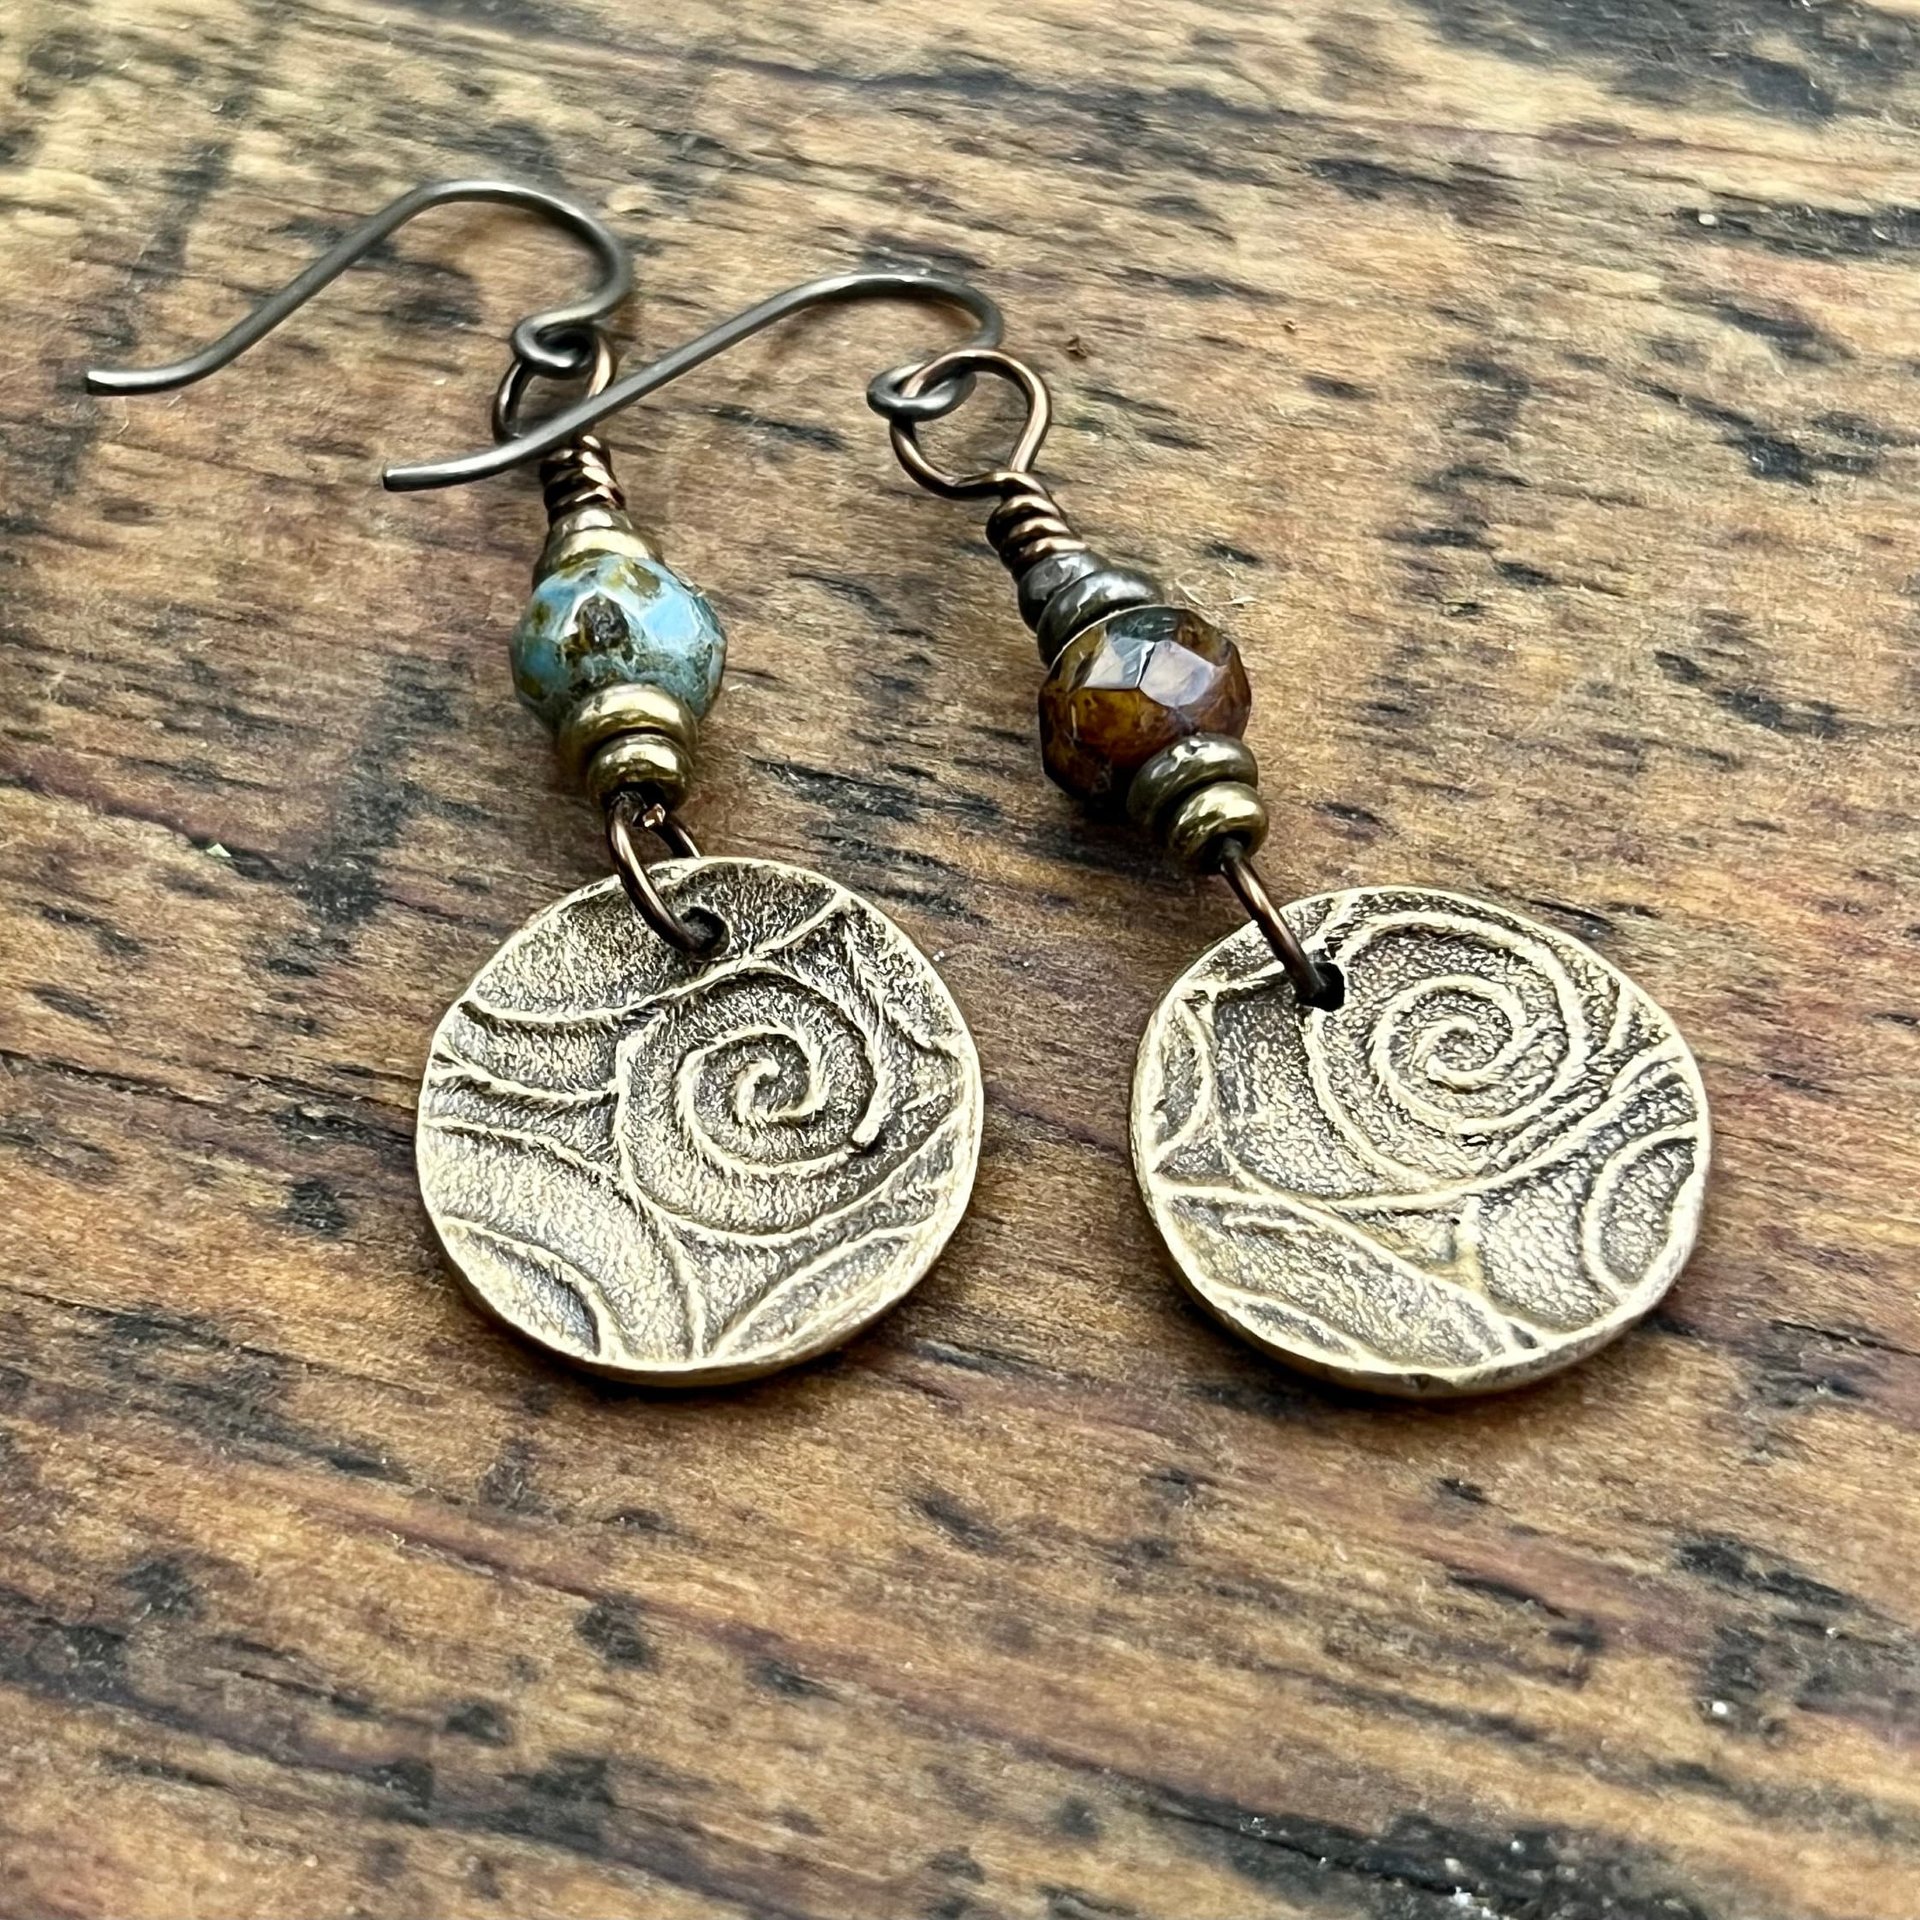 Tree of Life Earrings, Bronze Discs, Czech Glass Beads, Hypoallergenic Ear Wires, Earthy Jewelry, Hand Carved Trees, Boho Chic Style